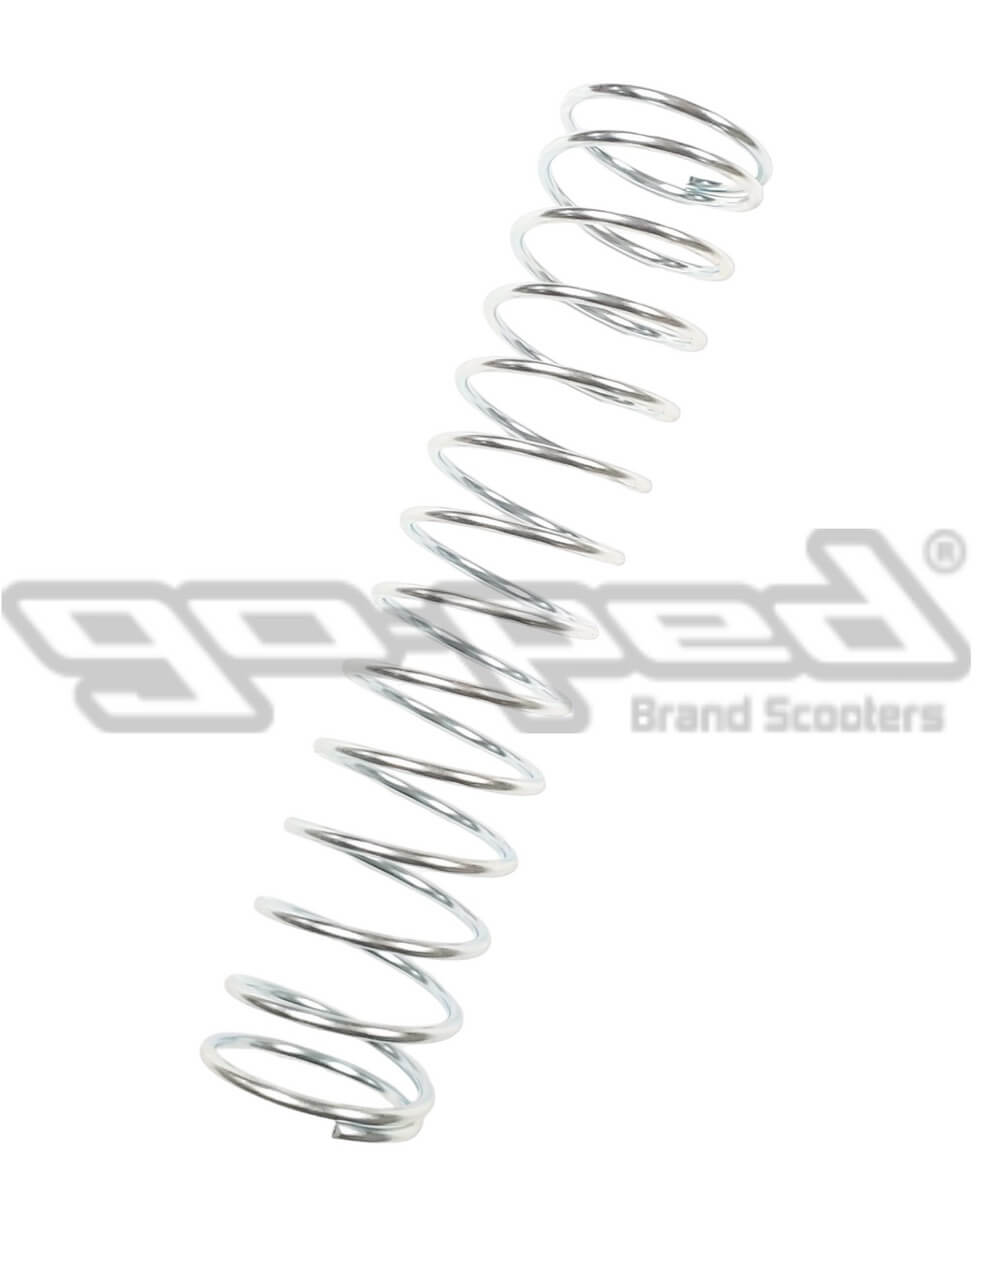 Go-Ped HANDLEBAR SAFETY SPRING (1060) for Scooters